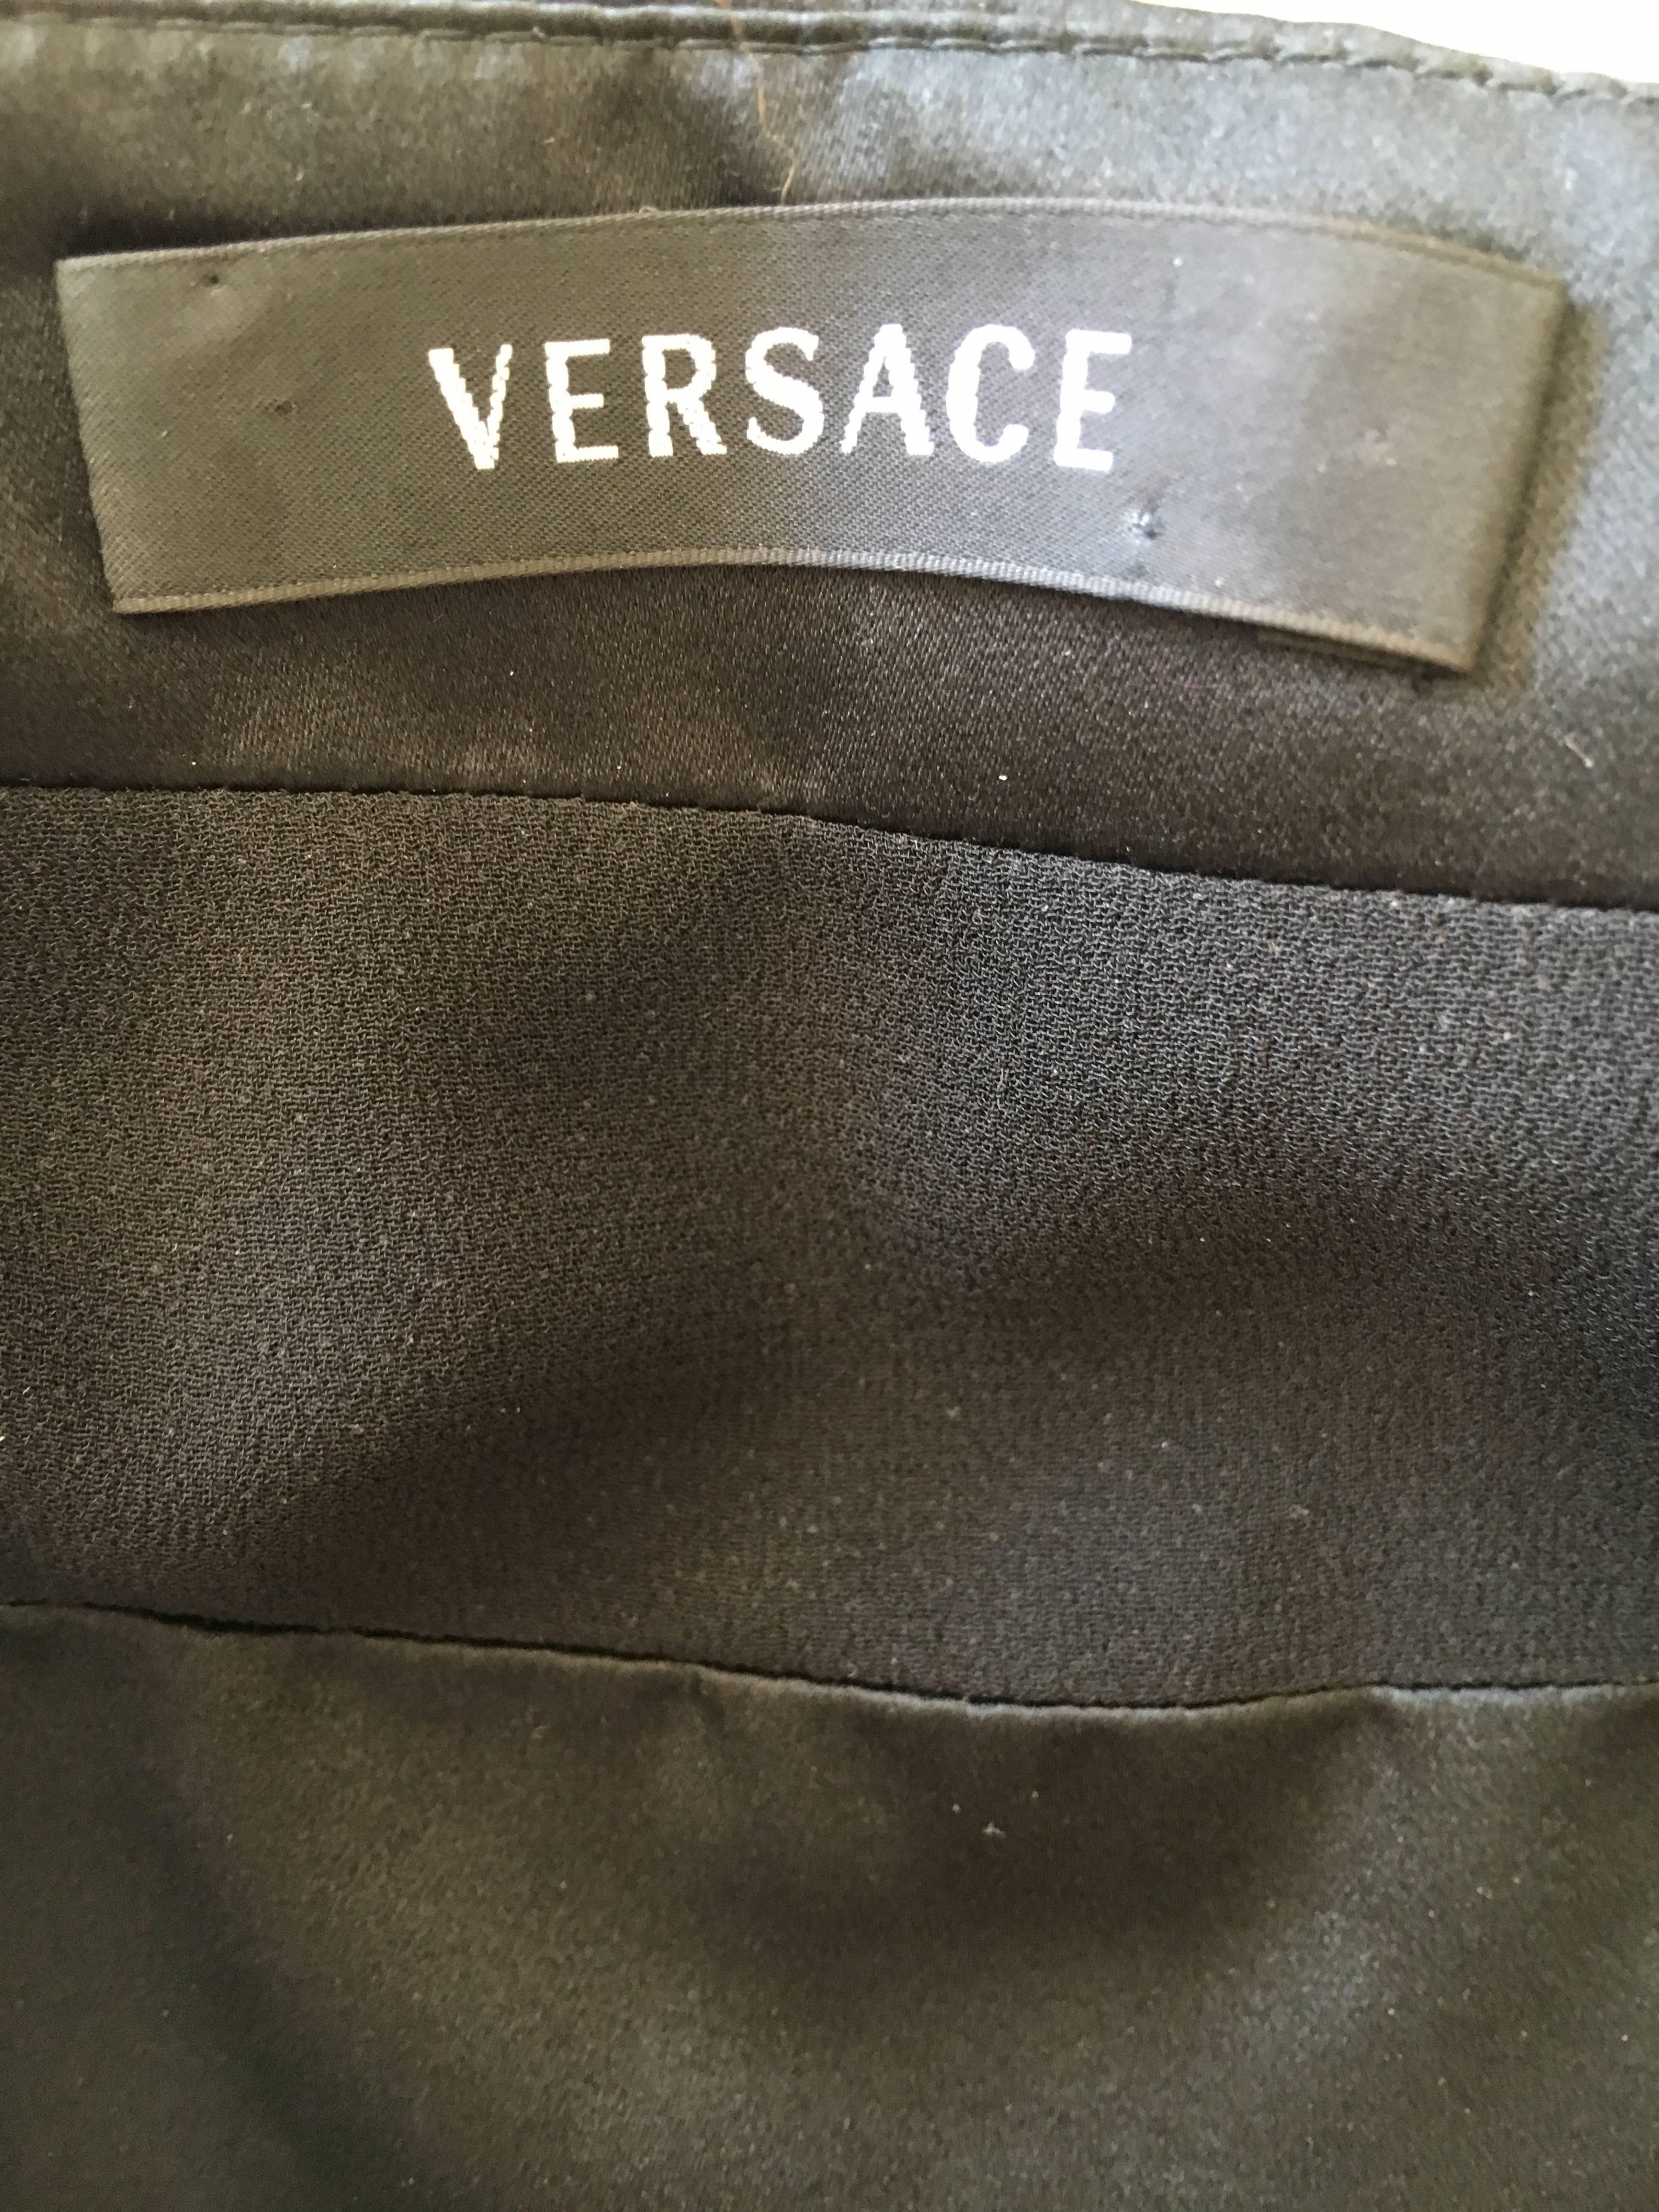 Versace Black Silk Sequined Cocktail Dress For Sale 6